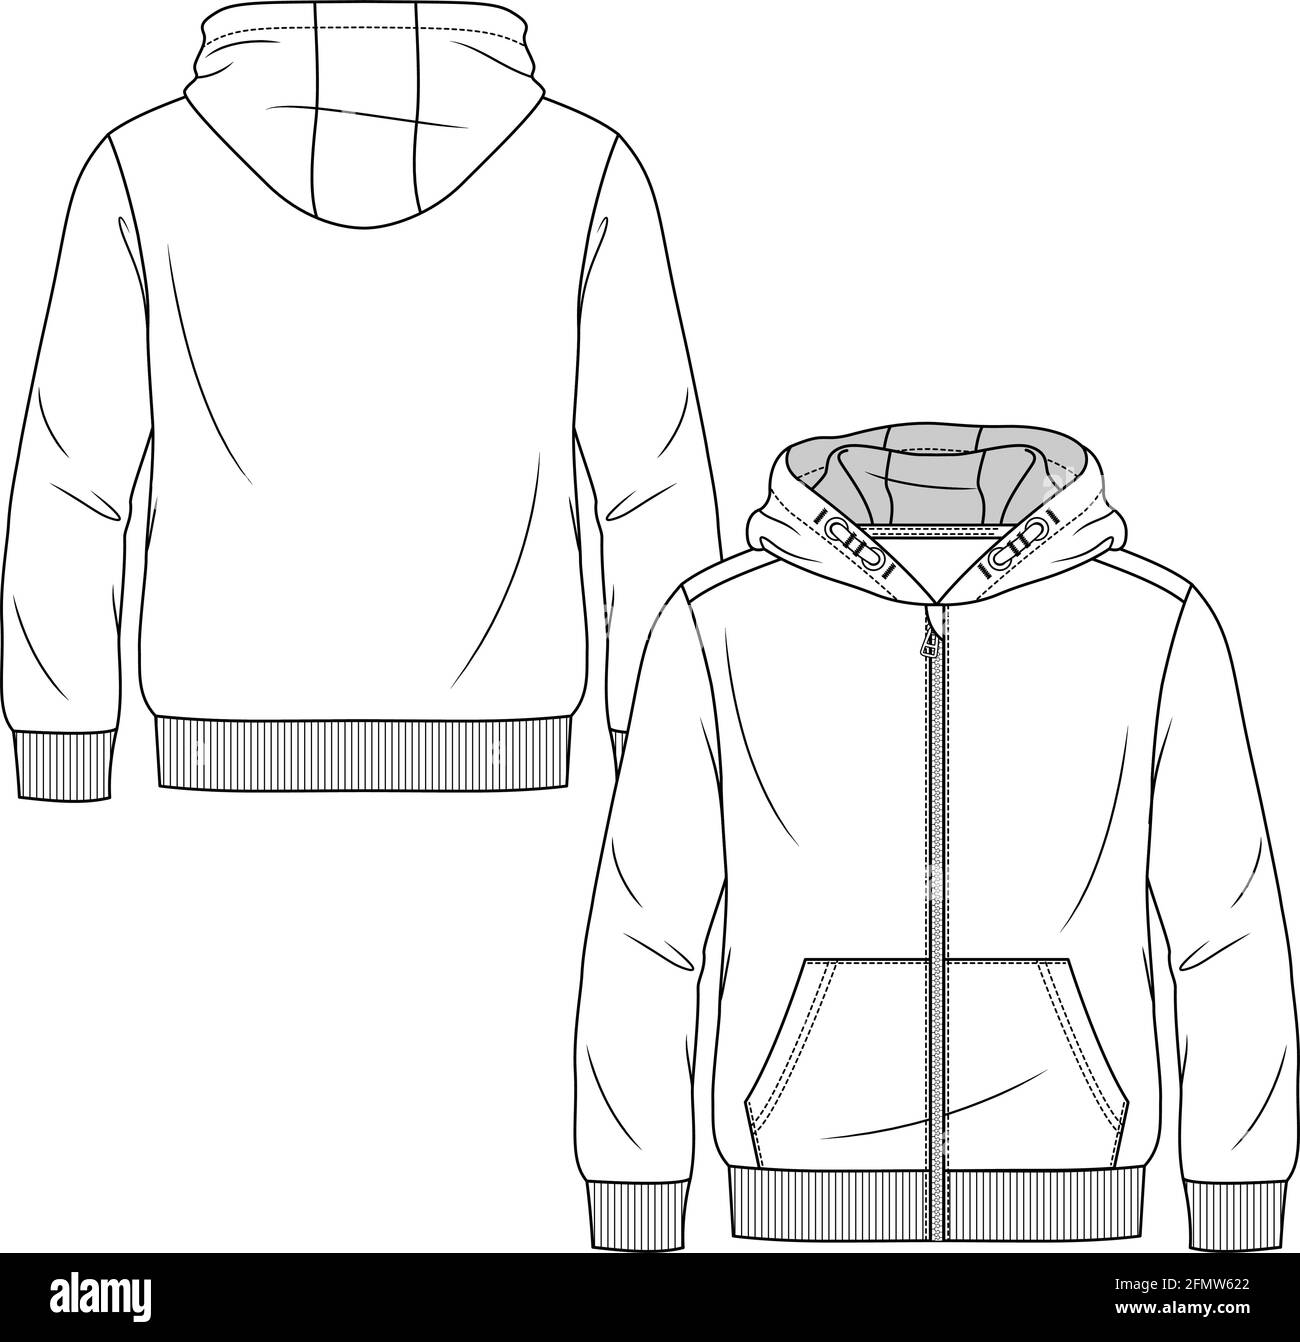 Flat sketches tutorialsSTONE ISLAND ZipUp HoodieHow to draw a flat  Hoodie in Illustrator2020  YouTube